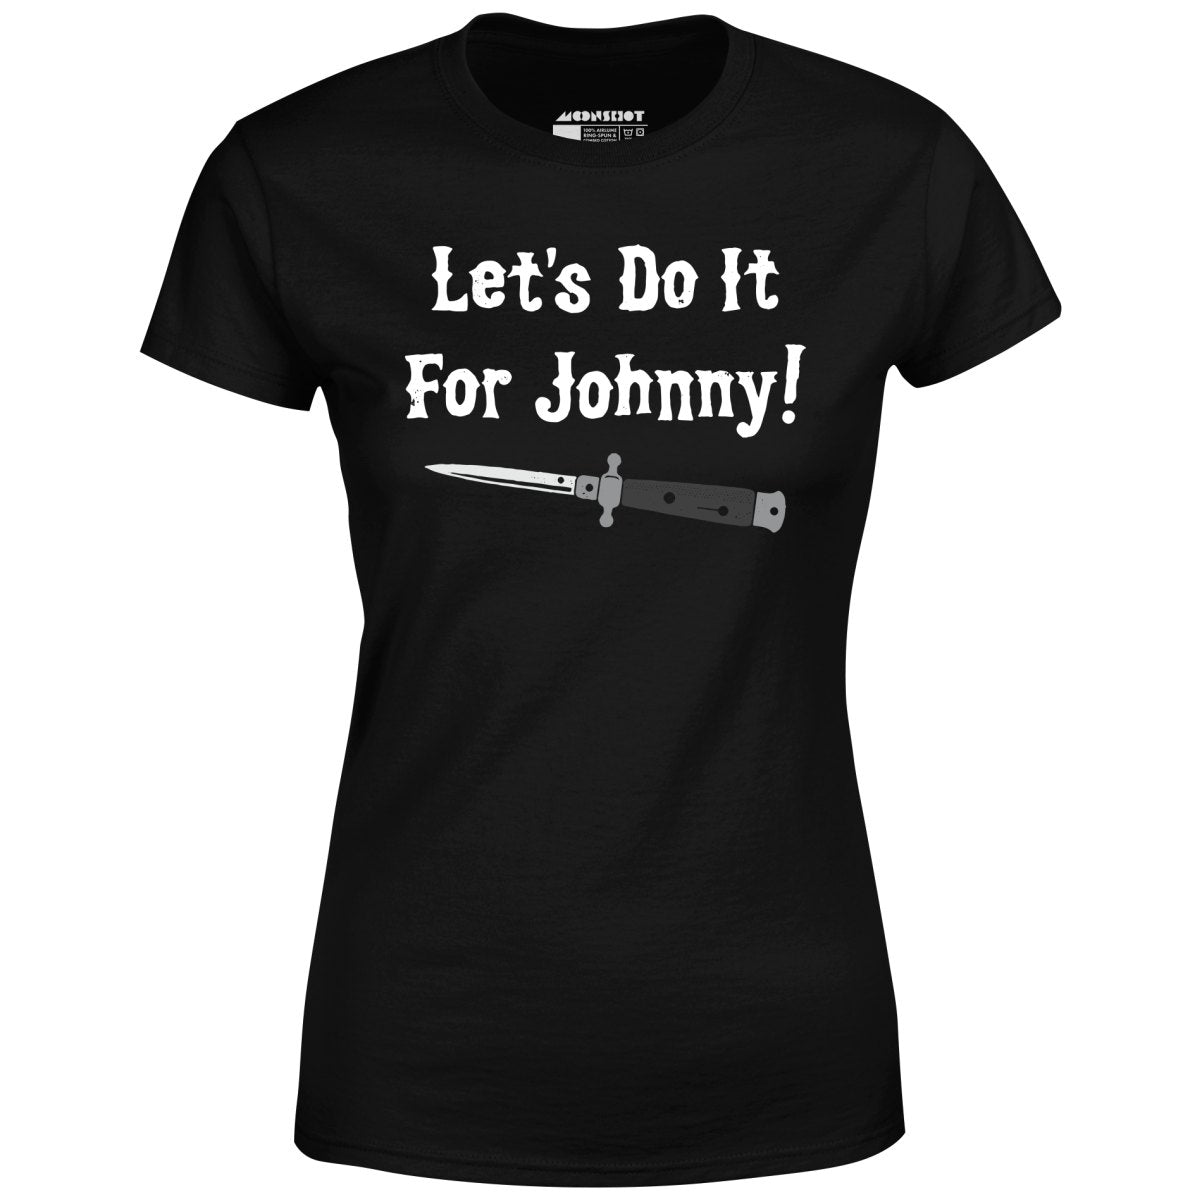 Let's Do it For Johnny - Outsiders - Women's T-Shirt